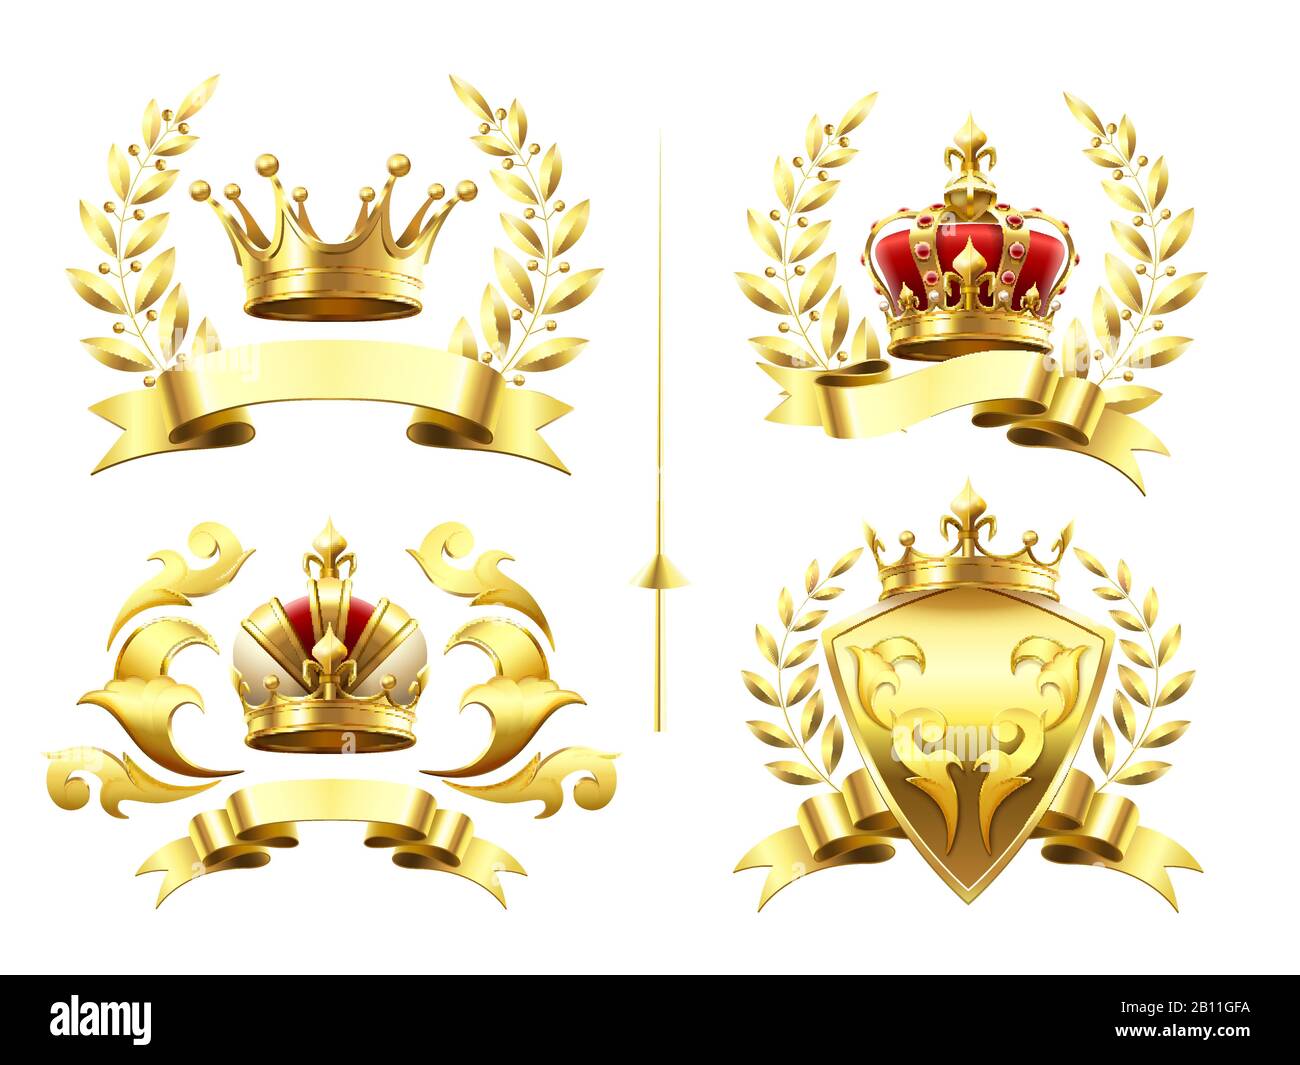 Realistic heraldic emblems. Insignia with golden crown, gold crowning medal and emblem with royal crowns on shields 3d vector set Stock Vector